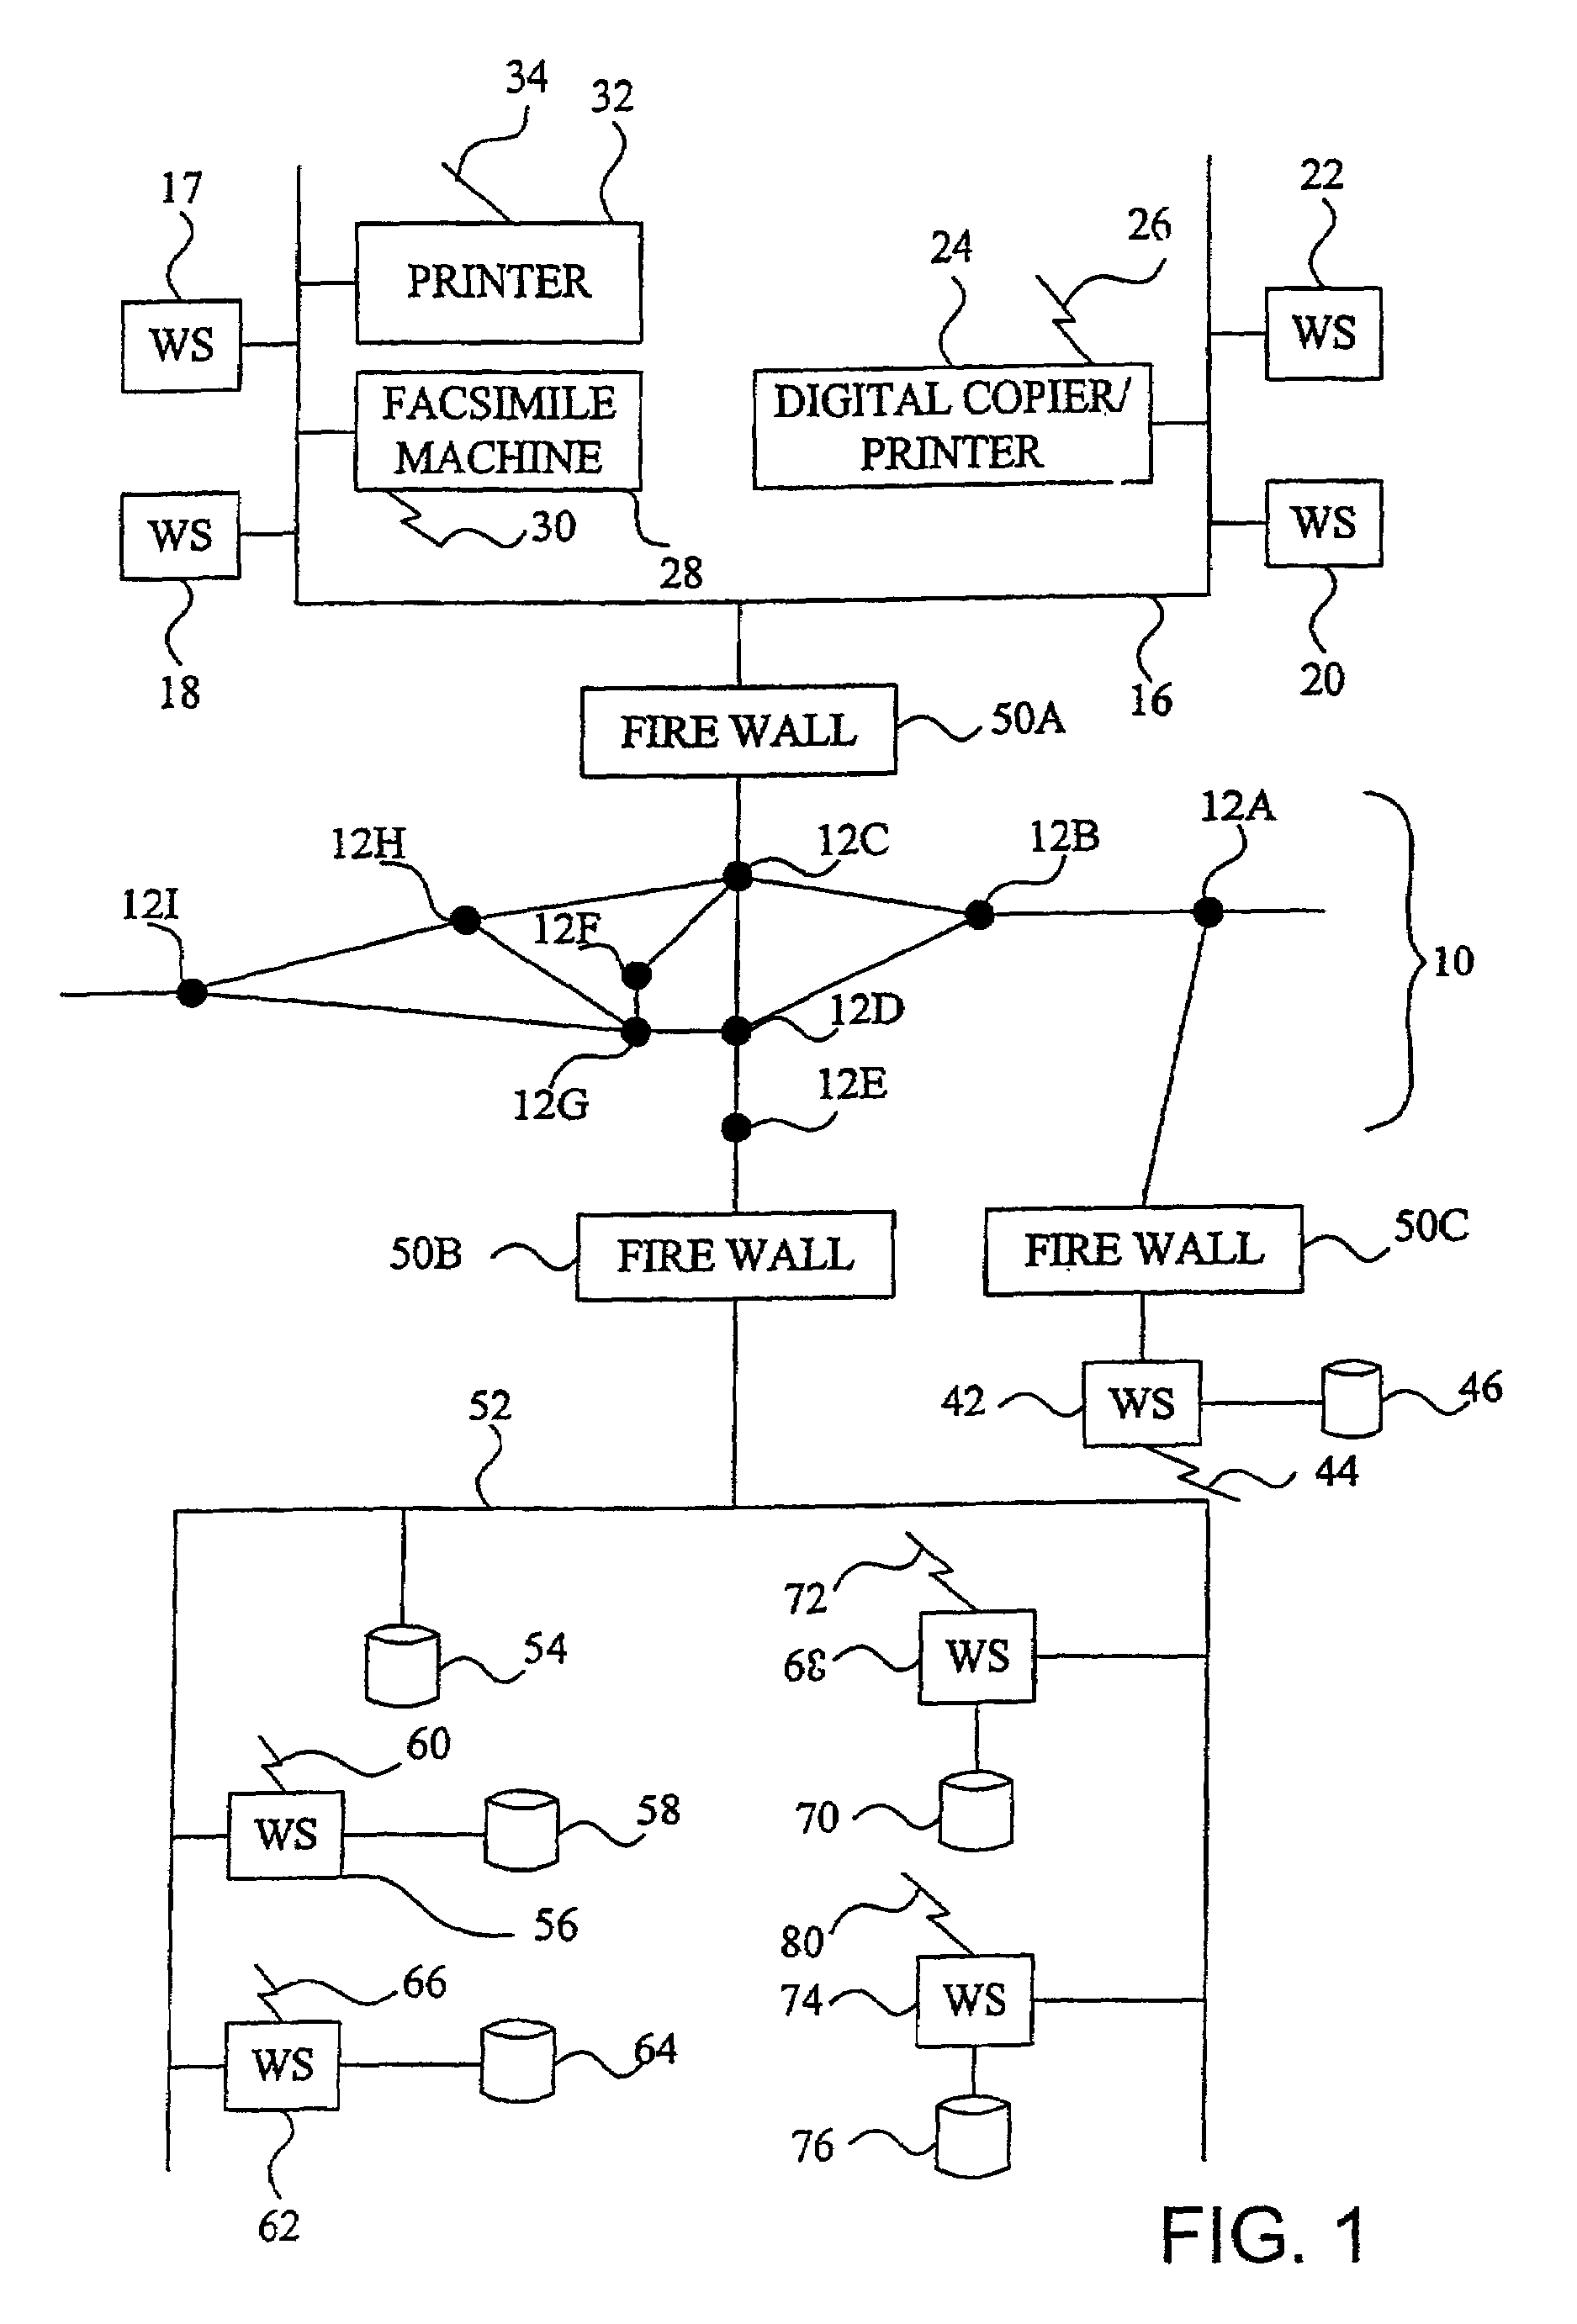 System, method, and computer program product for sending remote device configuration information to a monitor using e-mail